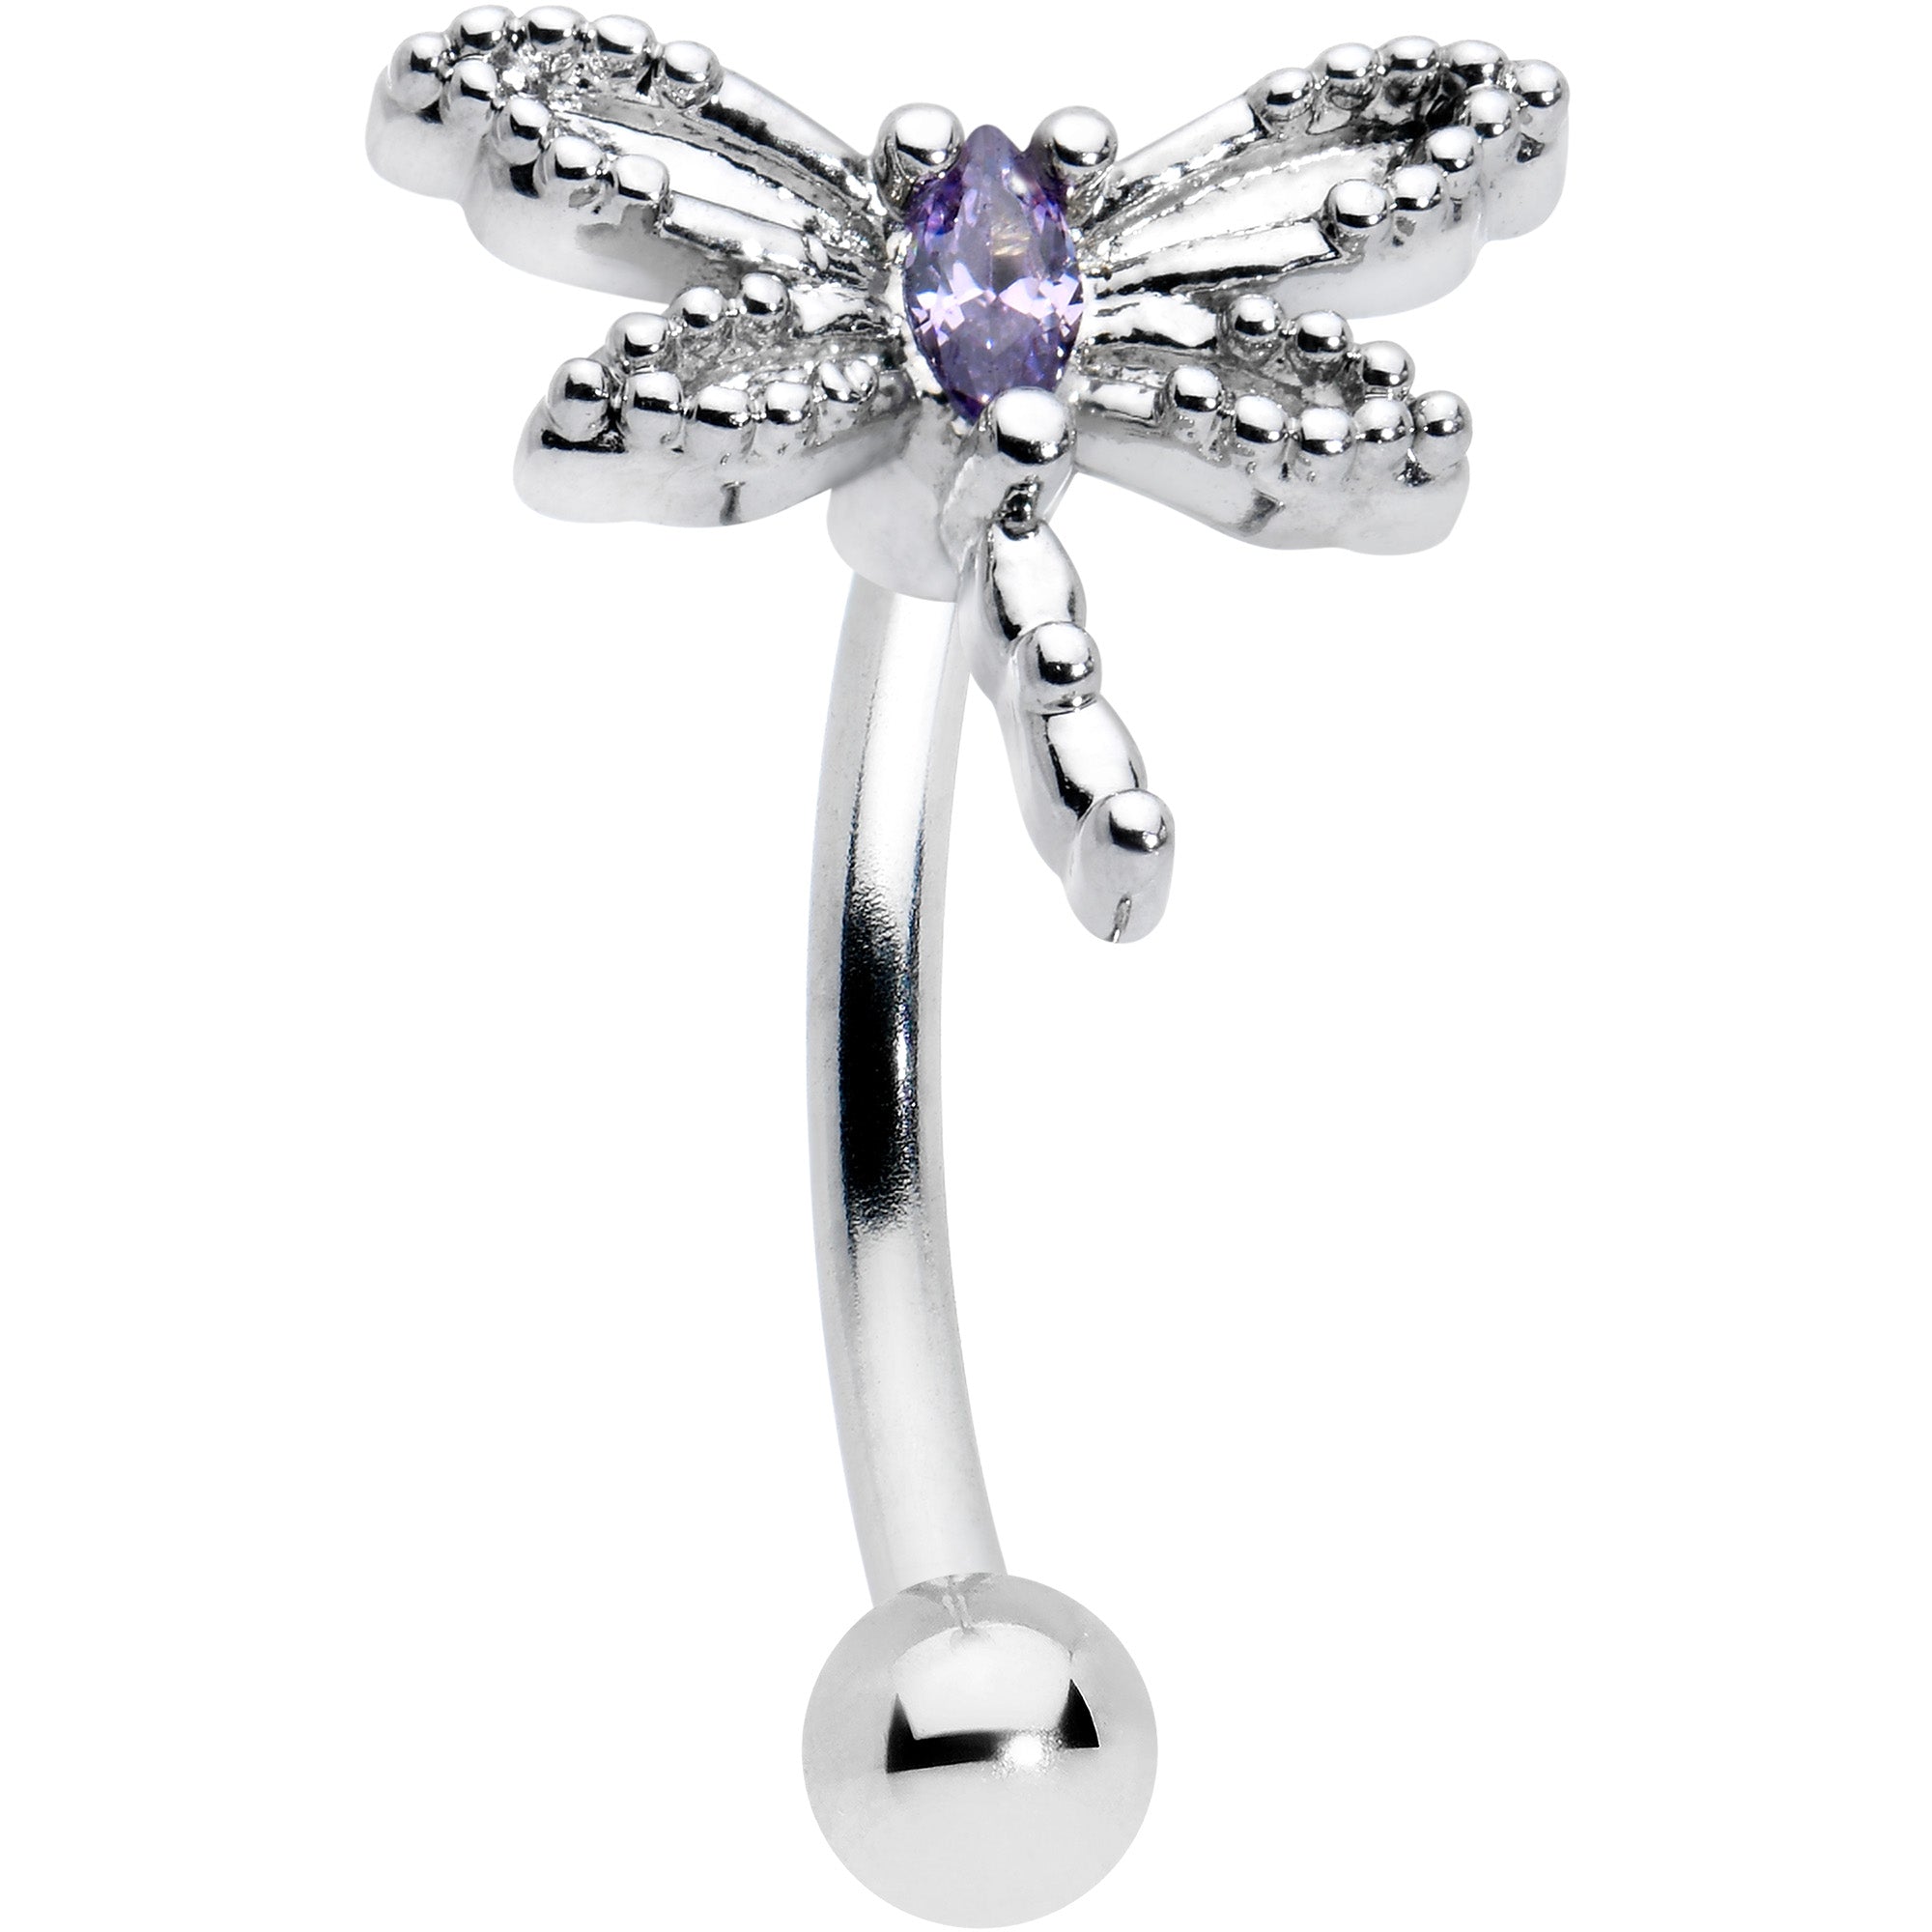 Image of 16 Gauge 5/16 Purple CZ Gem Open Dragonfly Curved Eyebrow Ring